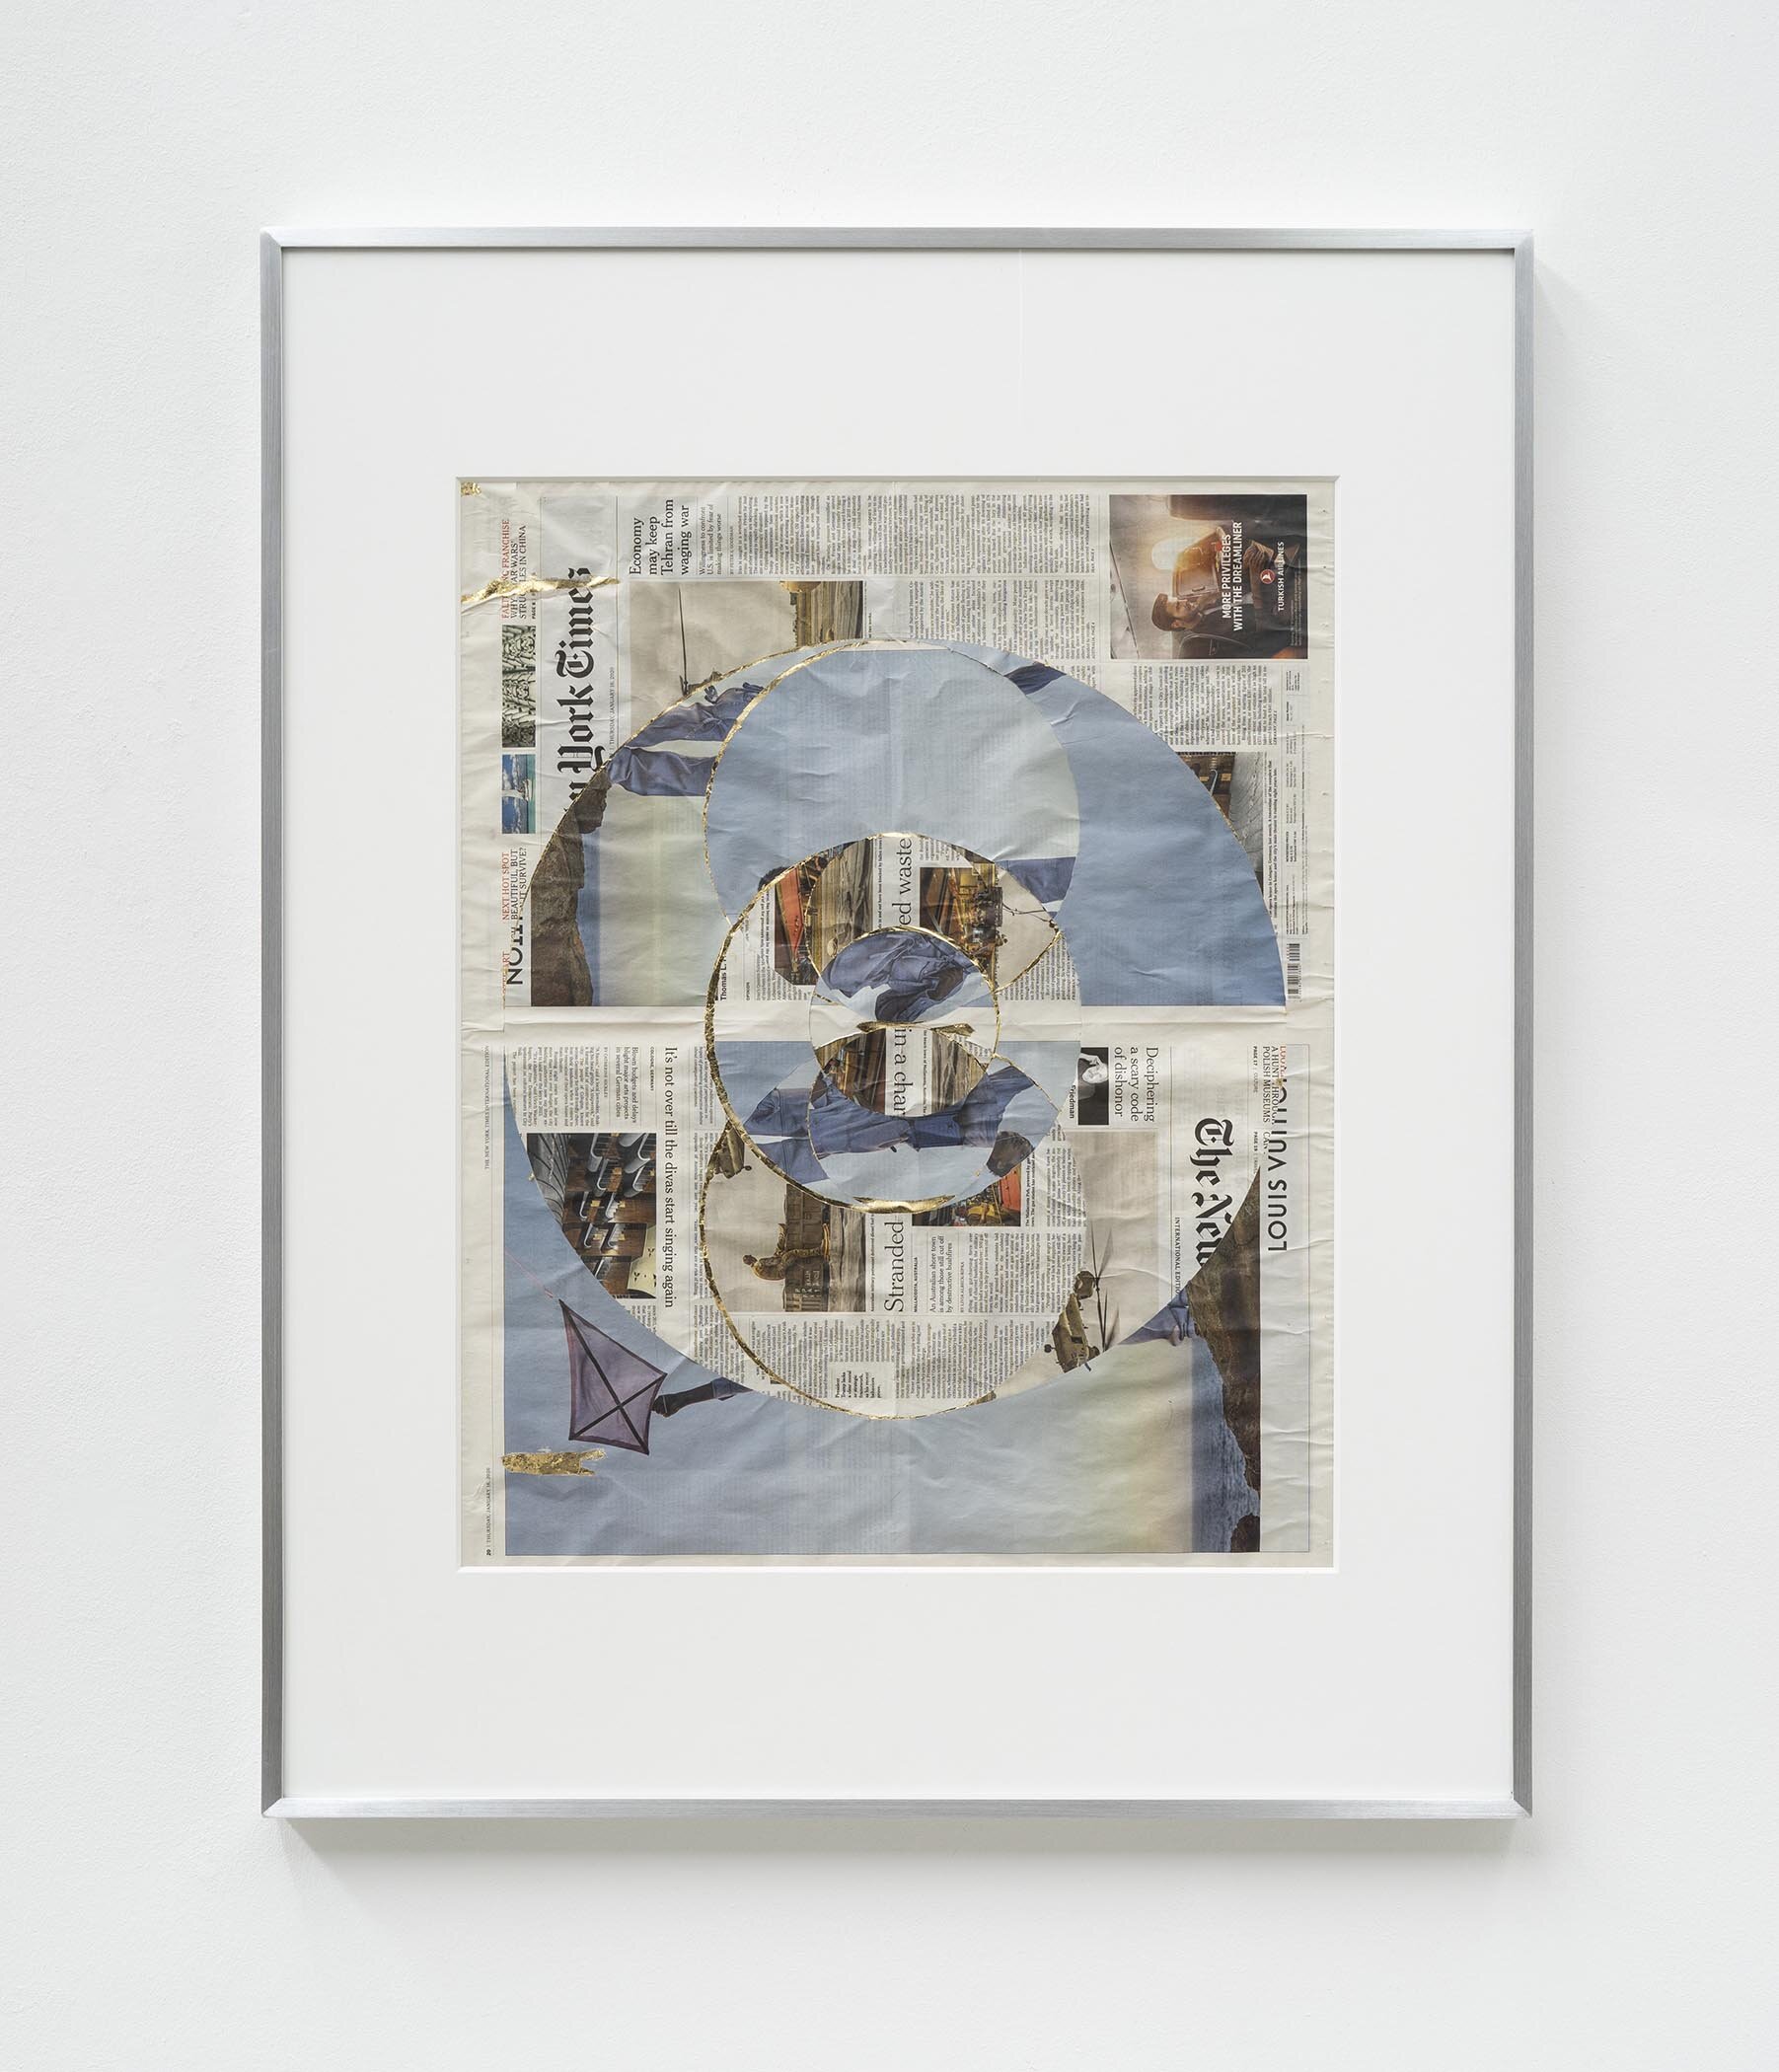   Blind Collage (Three 180º Rotations, The New York Times, January 16, 2020)   2020  Newspaper, tape, and 22 karat gold leaf  39 1/8 x 31 1/4 inches   Blind Collages, 2017–   Exhibition:  Standard Deviations, 2020  